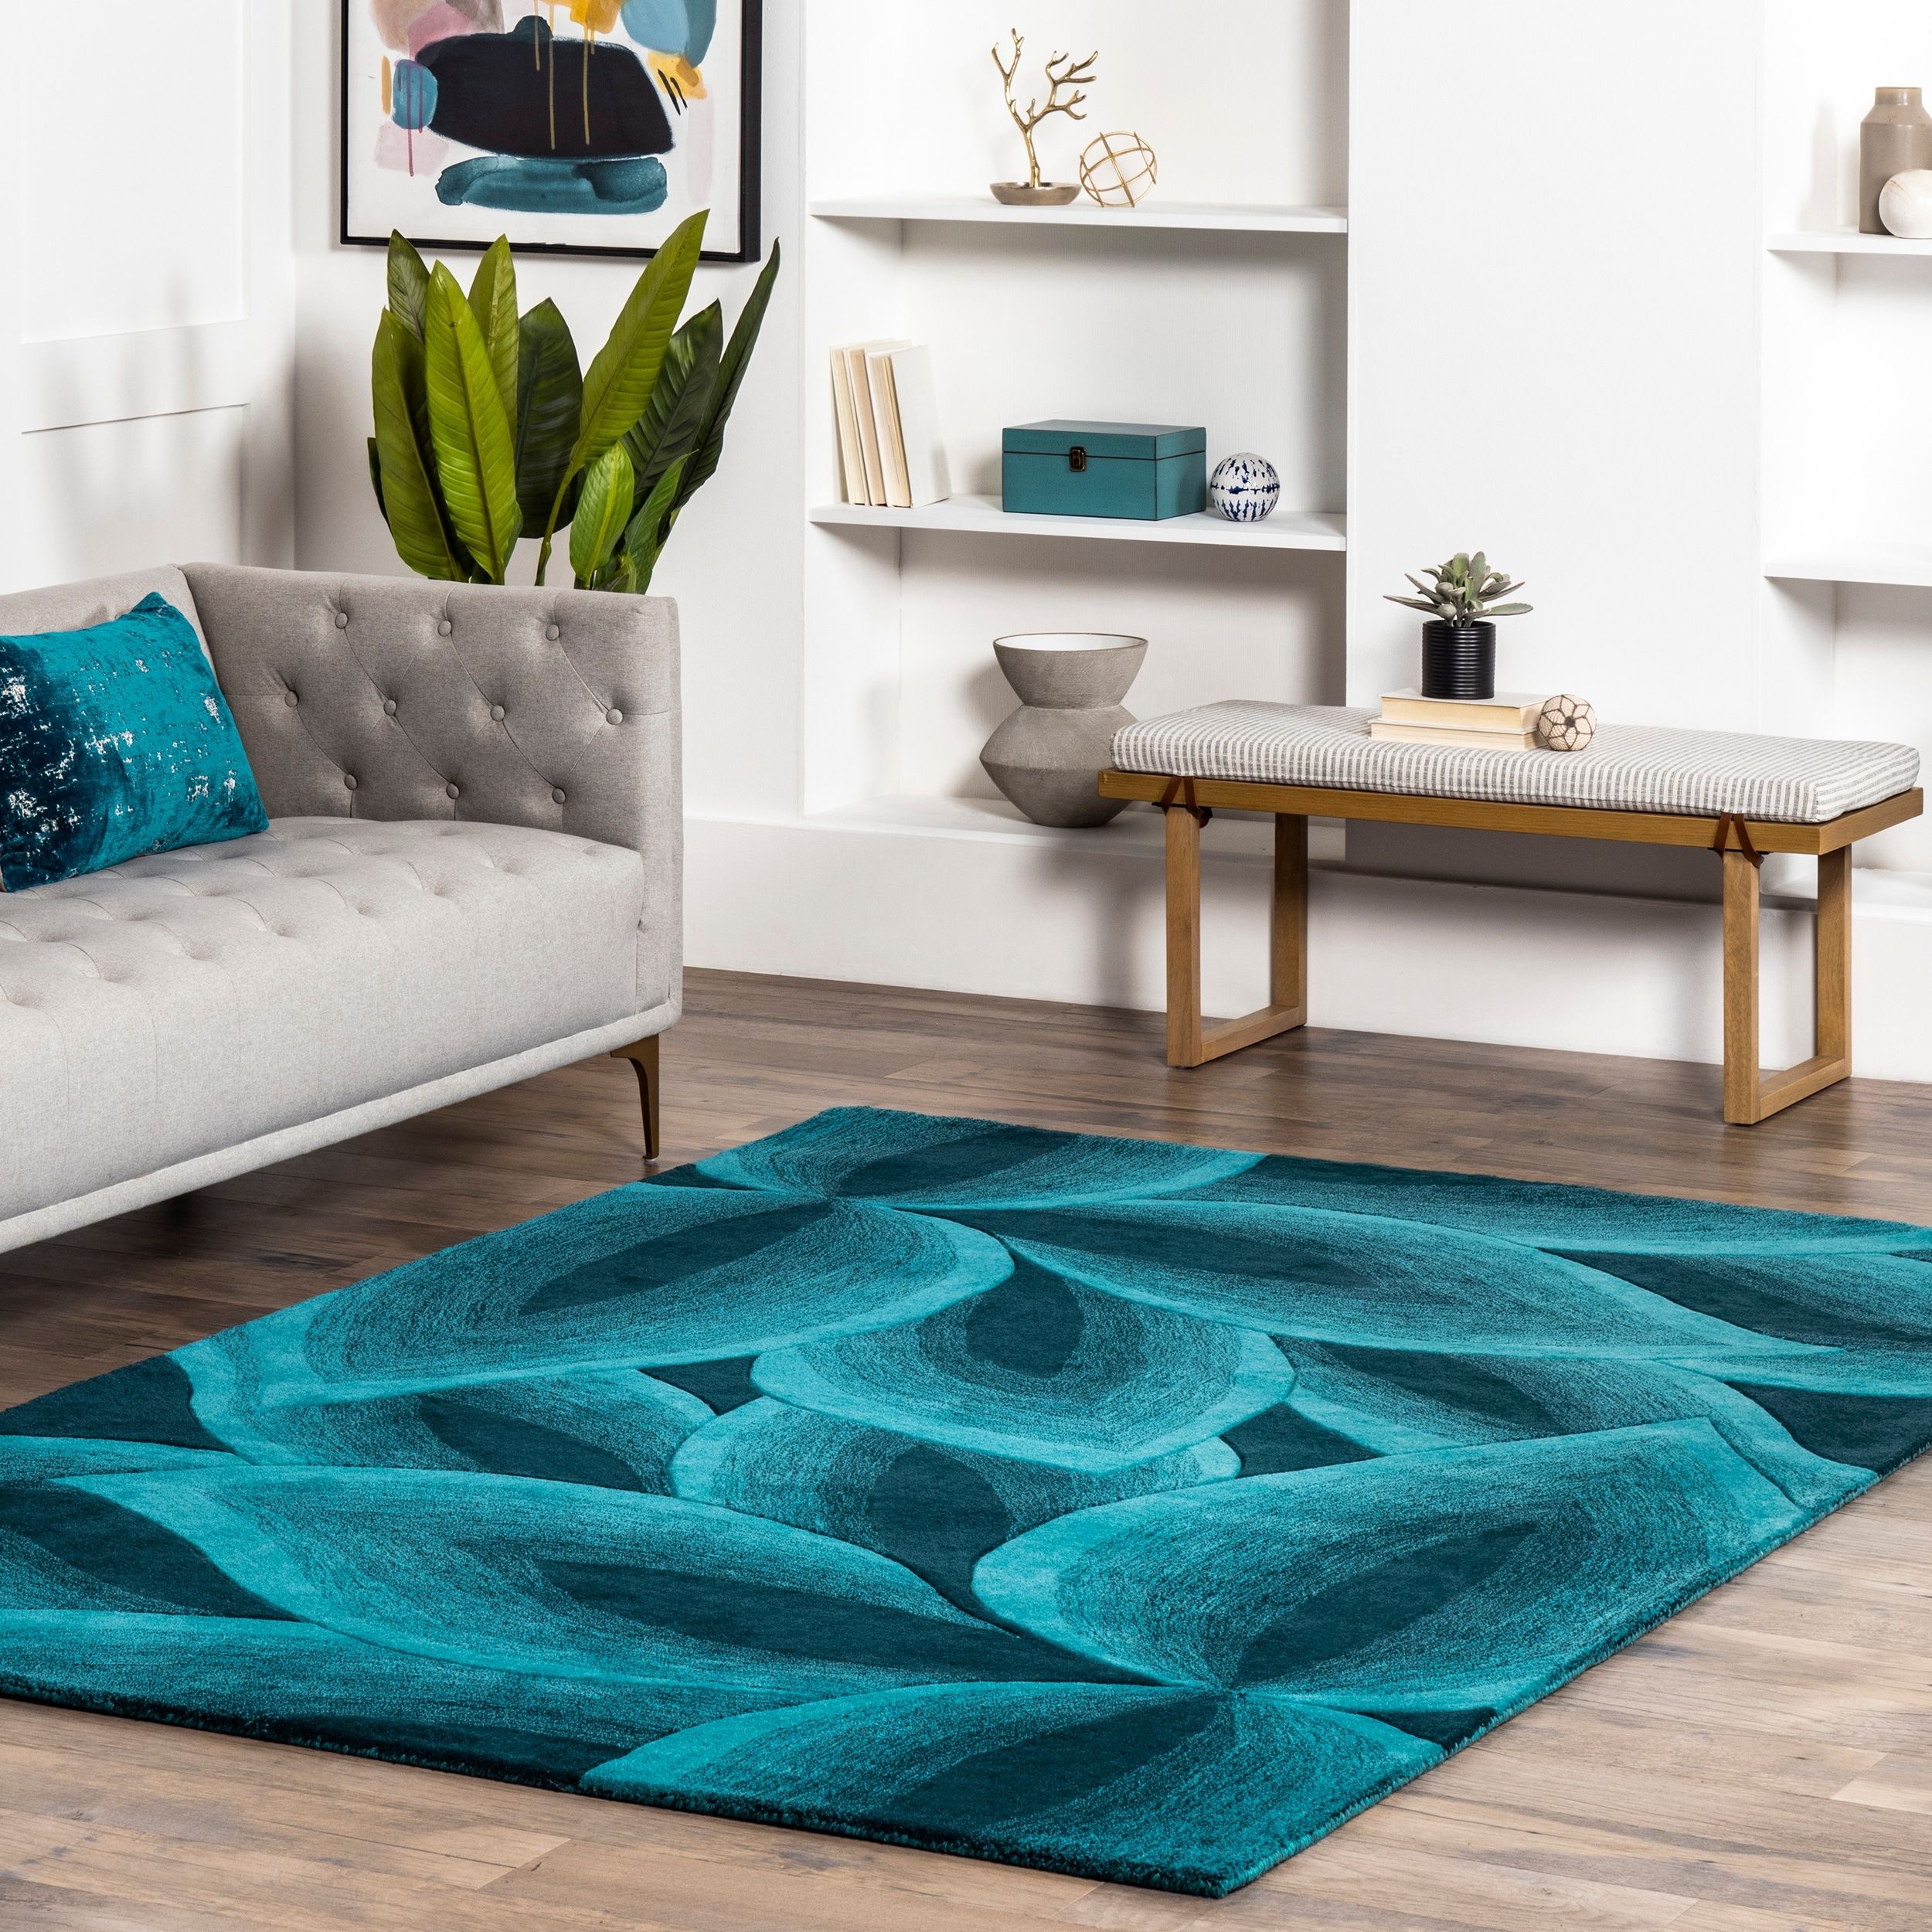 Nuloom Turquoise Handmade Leaves Wool Area Rug – Overstock – 7344098 Within Turquoise Rugs (View 7 of 15)